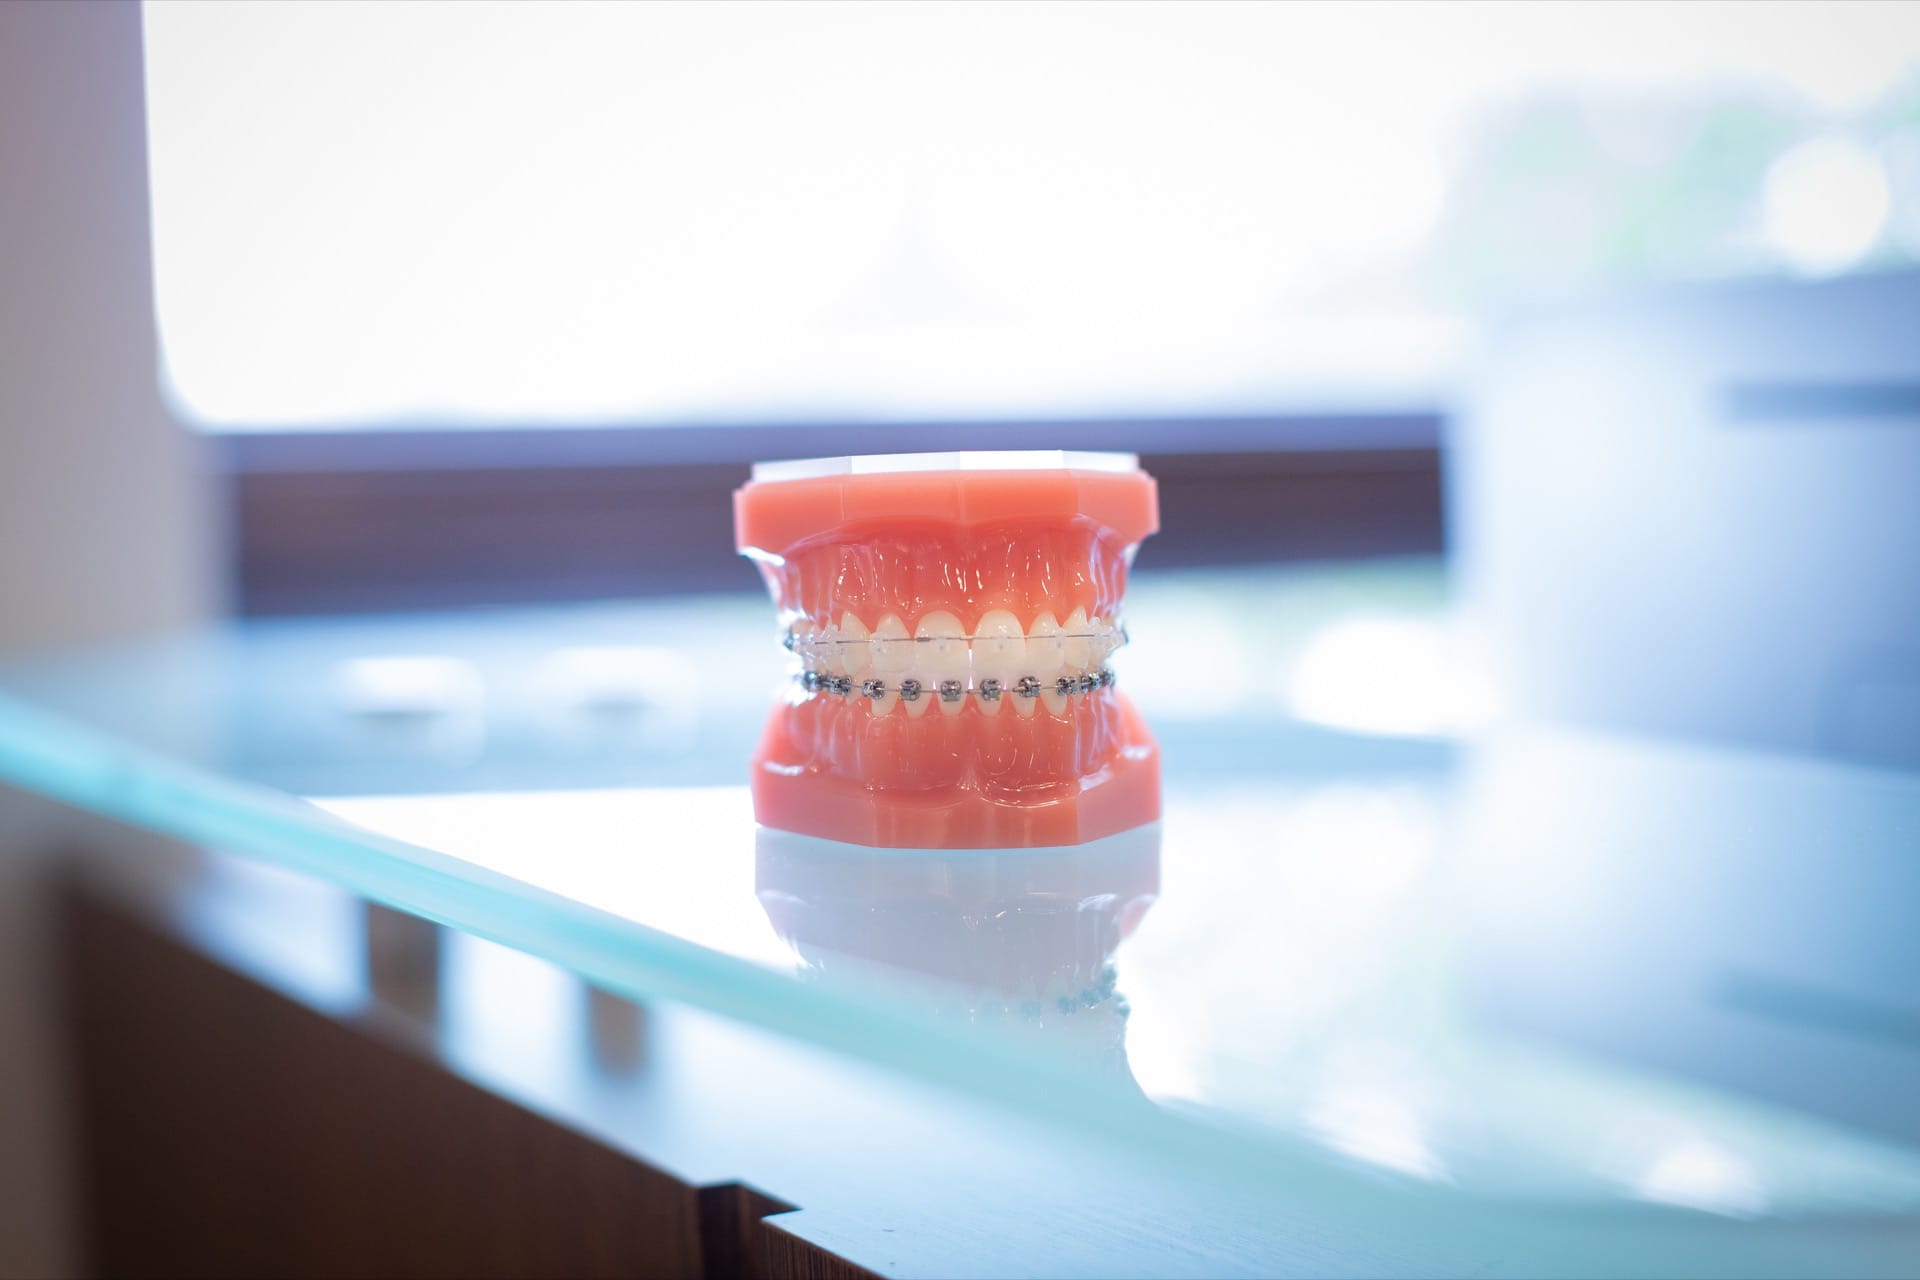 How to Practice Good Oral Hygiene With Braces?